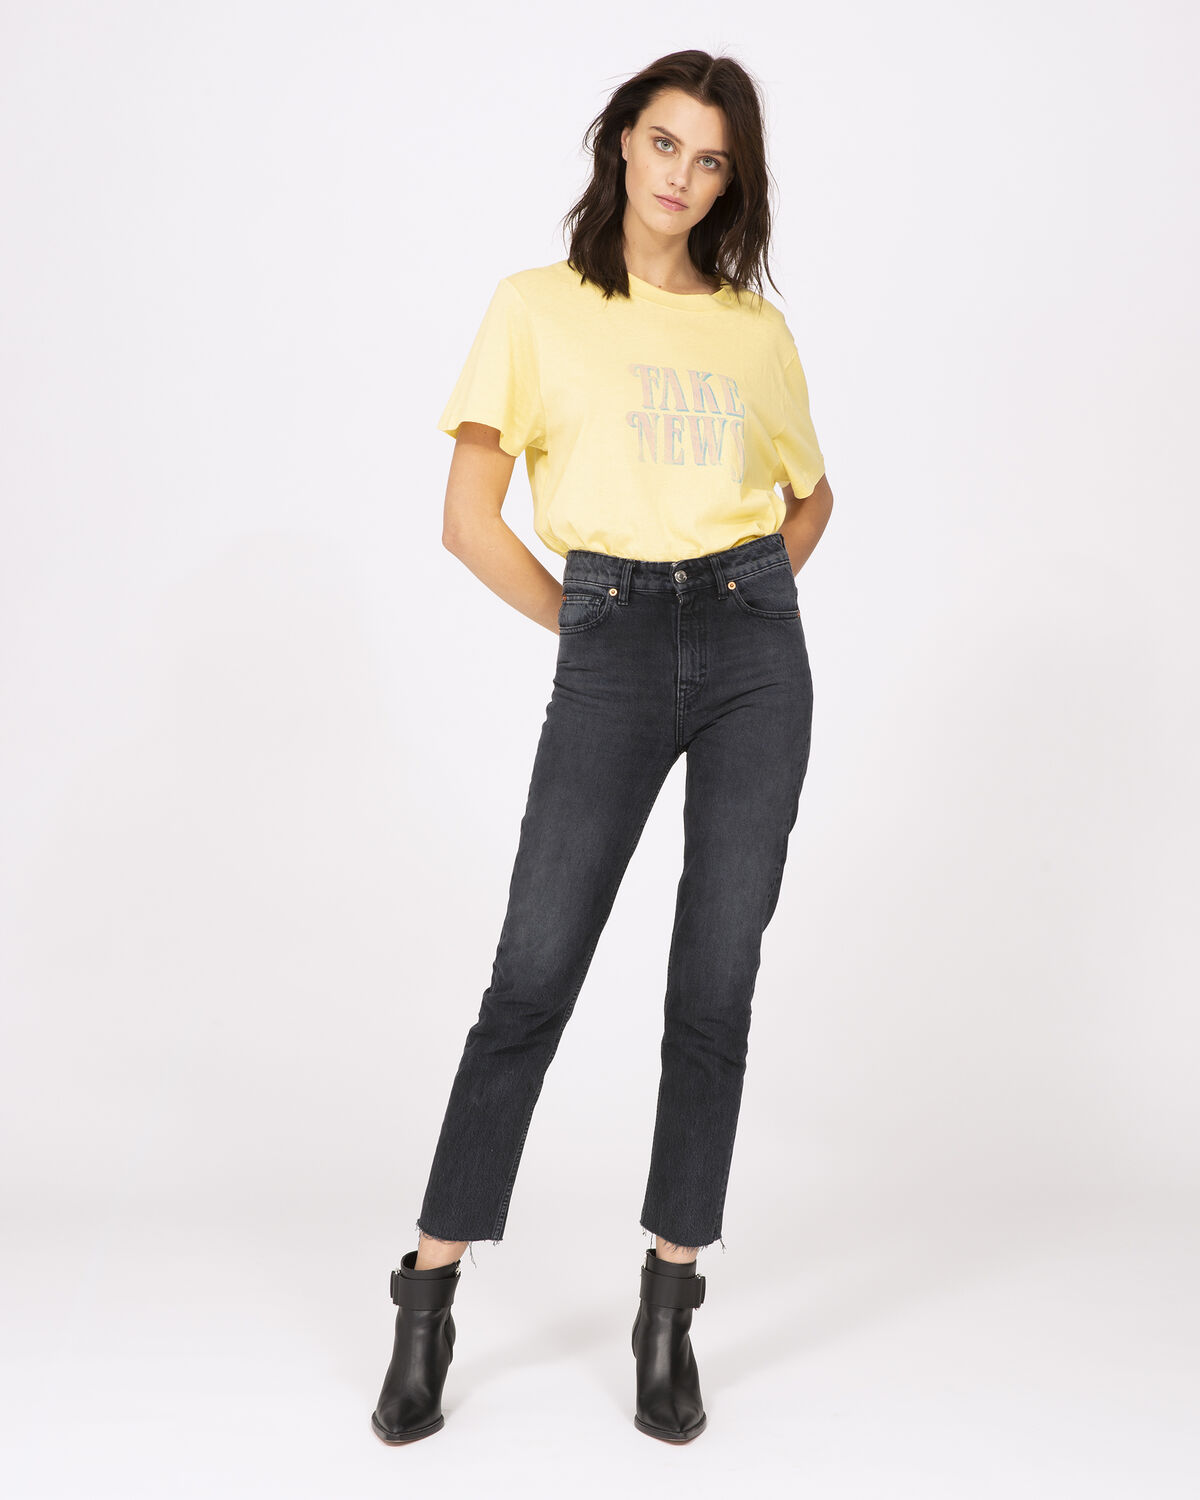 Photo of IRO Paris Hothead T-Shirt Vanille - This White Cotton T-shirt Features The Inscription fake News. Oversized And Masculine, Combine It With High Waist Jeans And Pointed Boots For A Resolutely Rock And Modern Look. Spring Summer 19